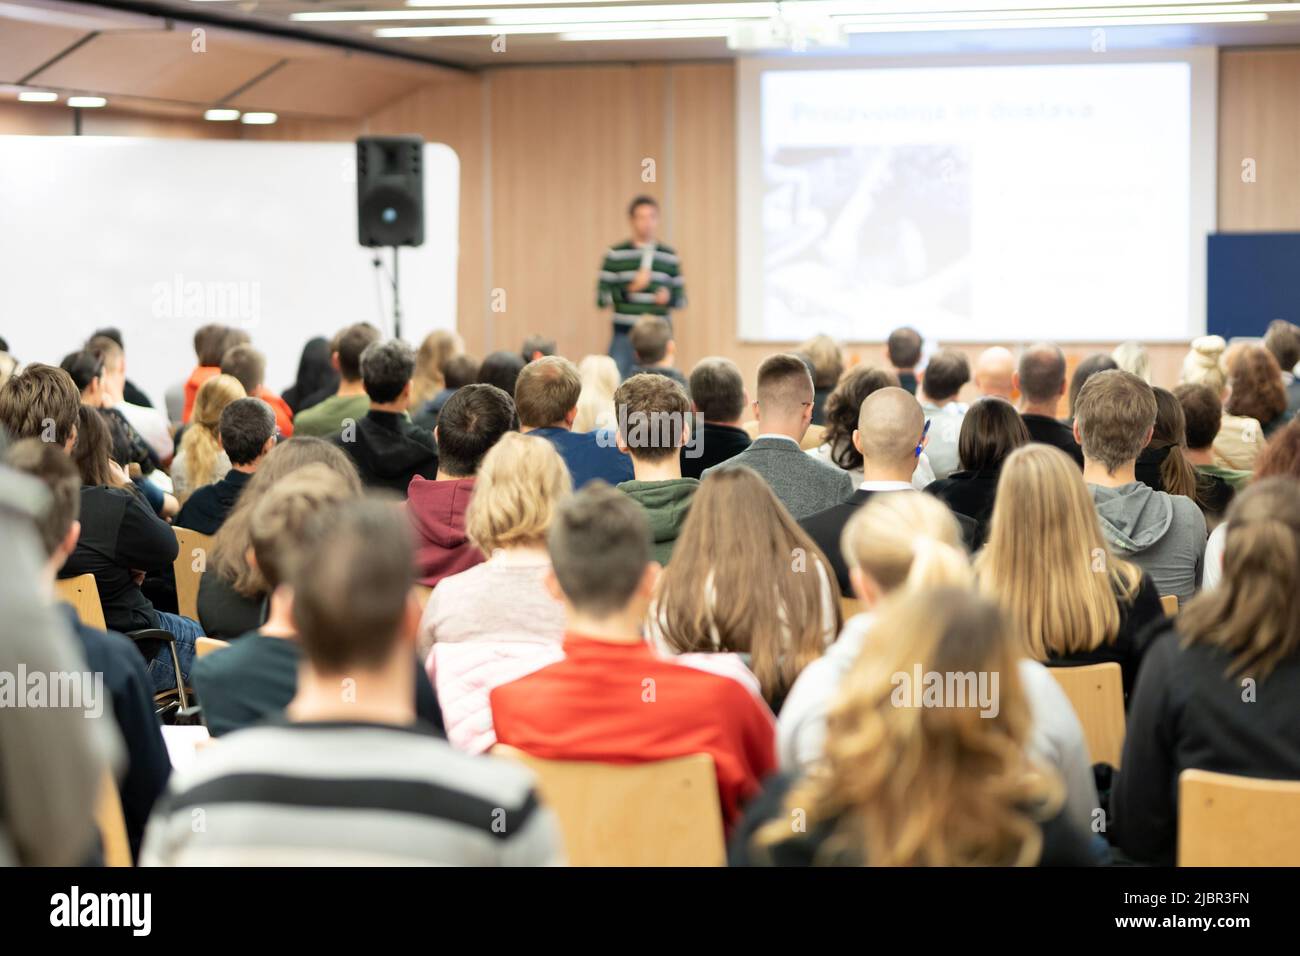 Speaker giving presentation in lecture hall at university Stock Photo